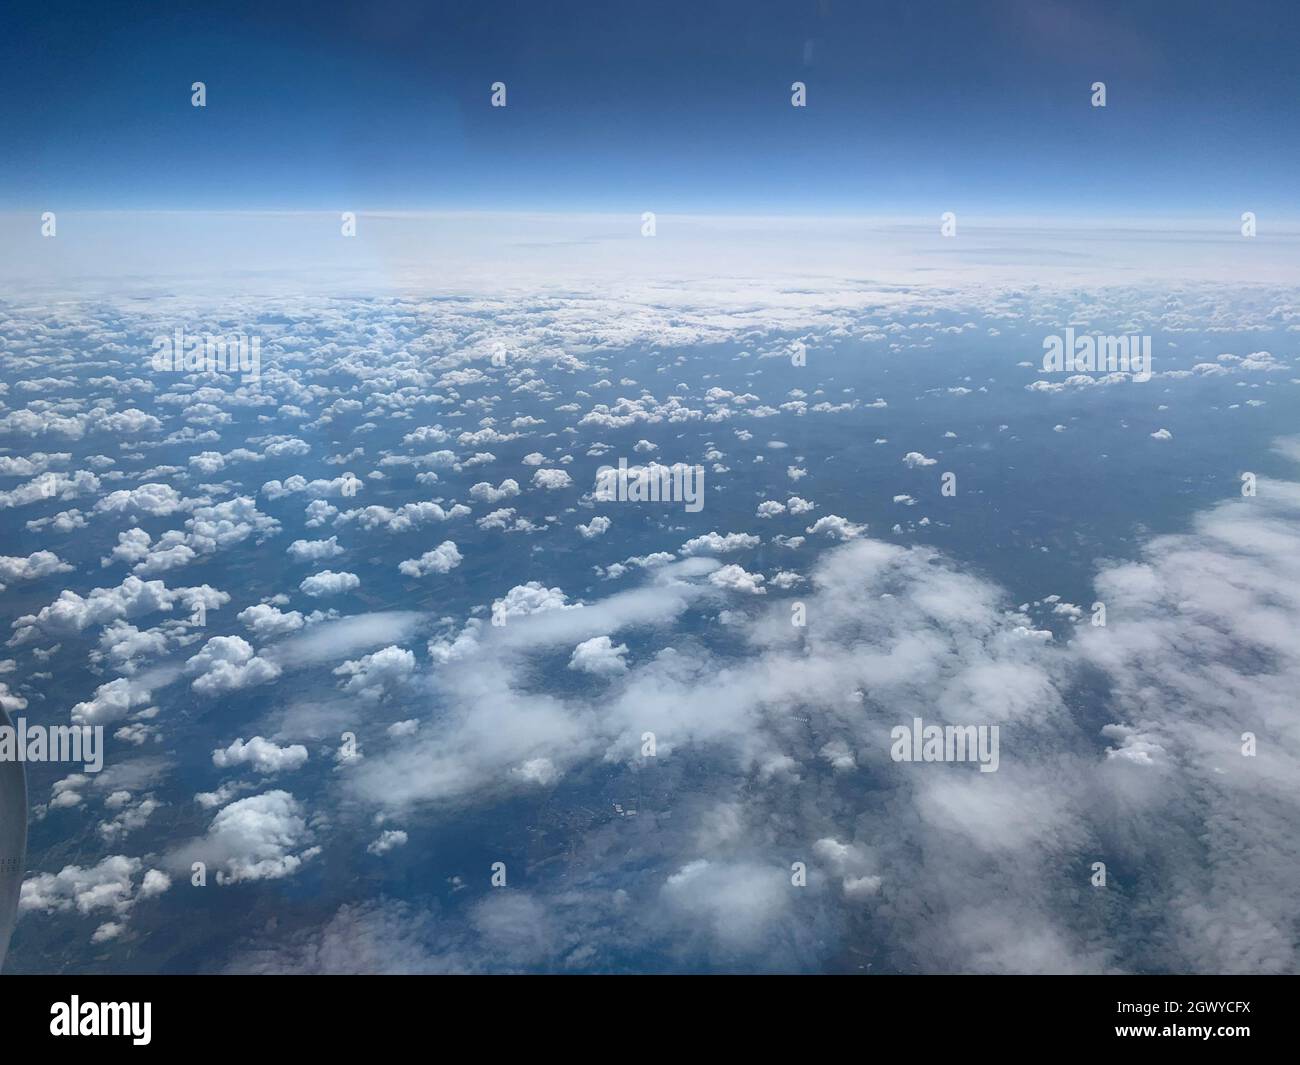 Aerial View Of Over Clouds In Sky Stock Photo